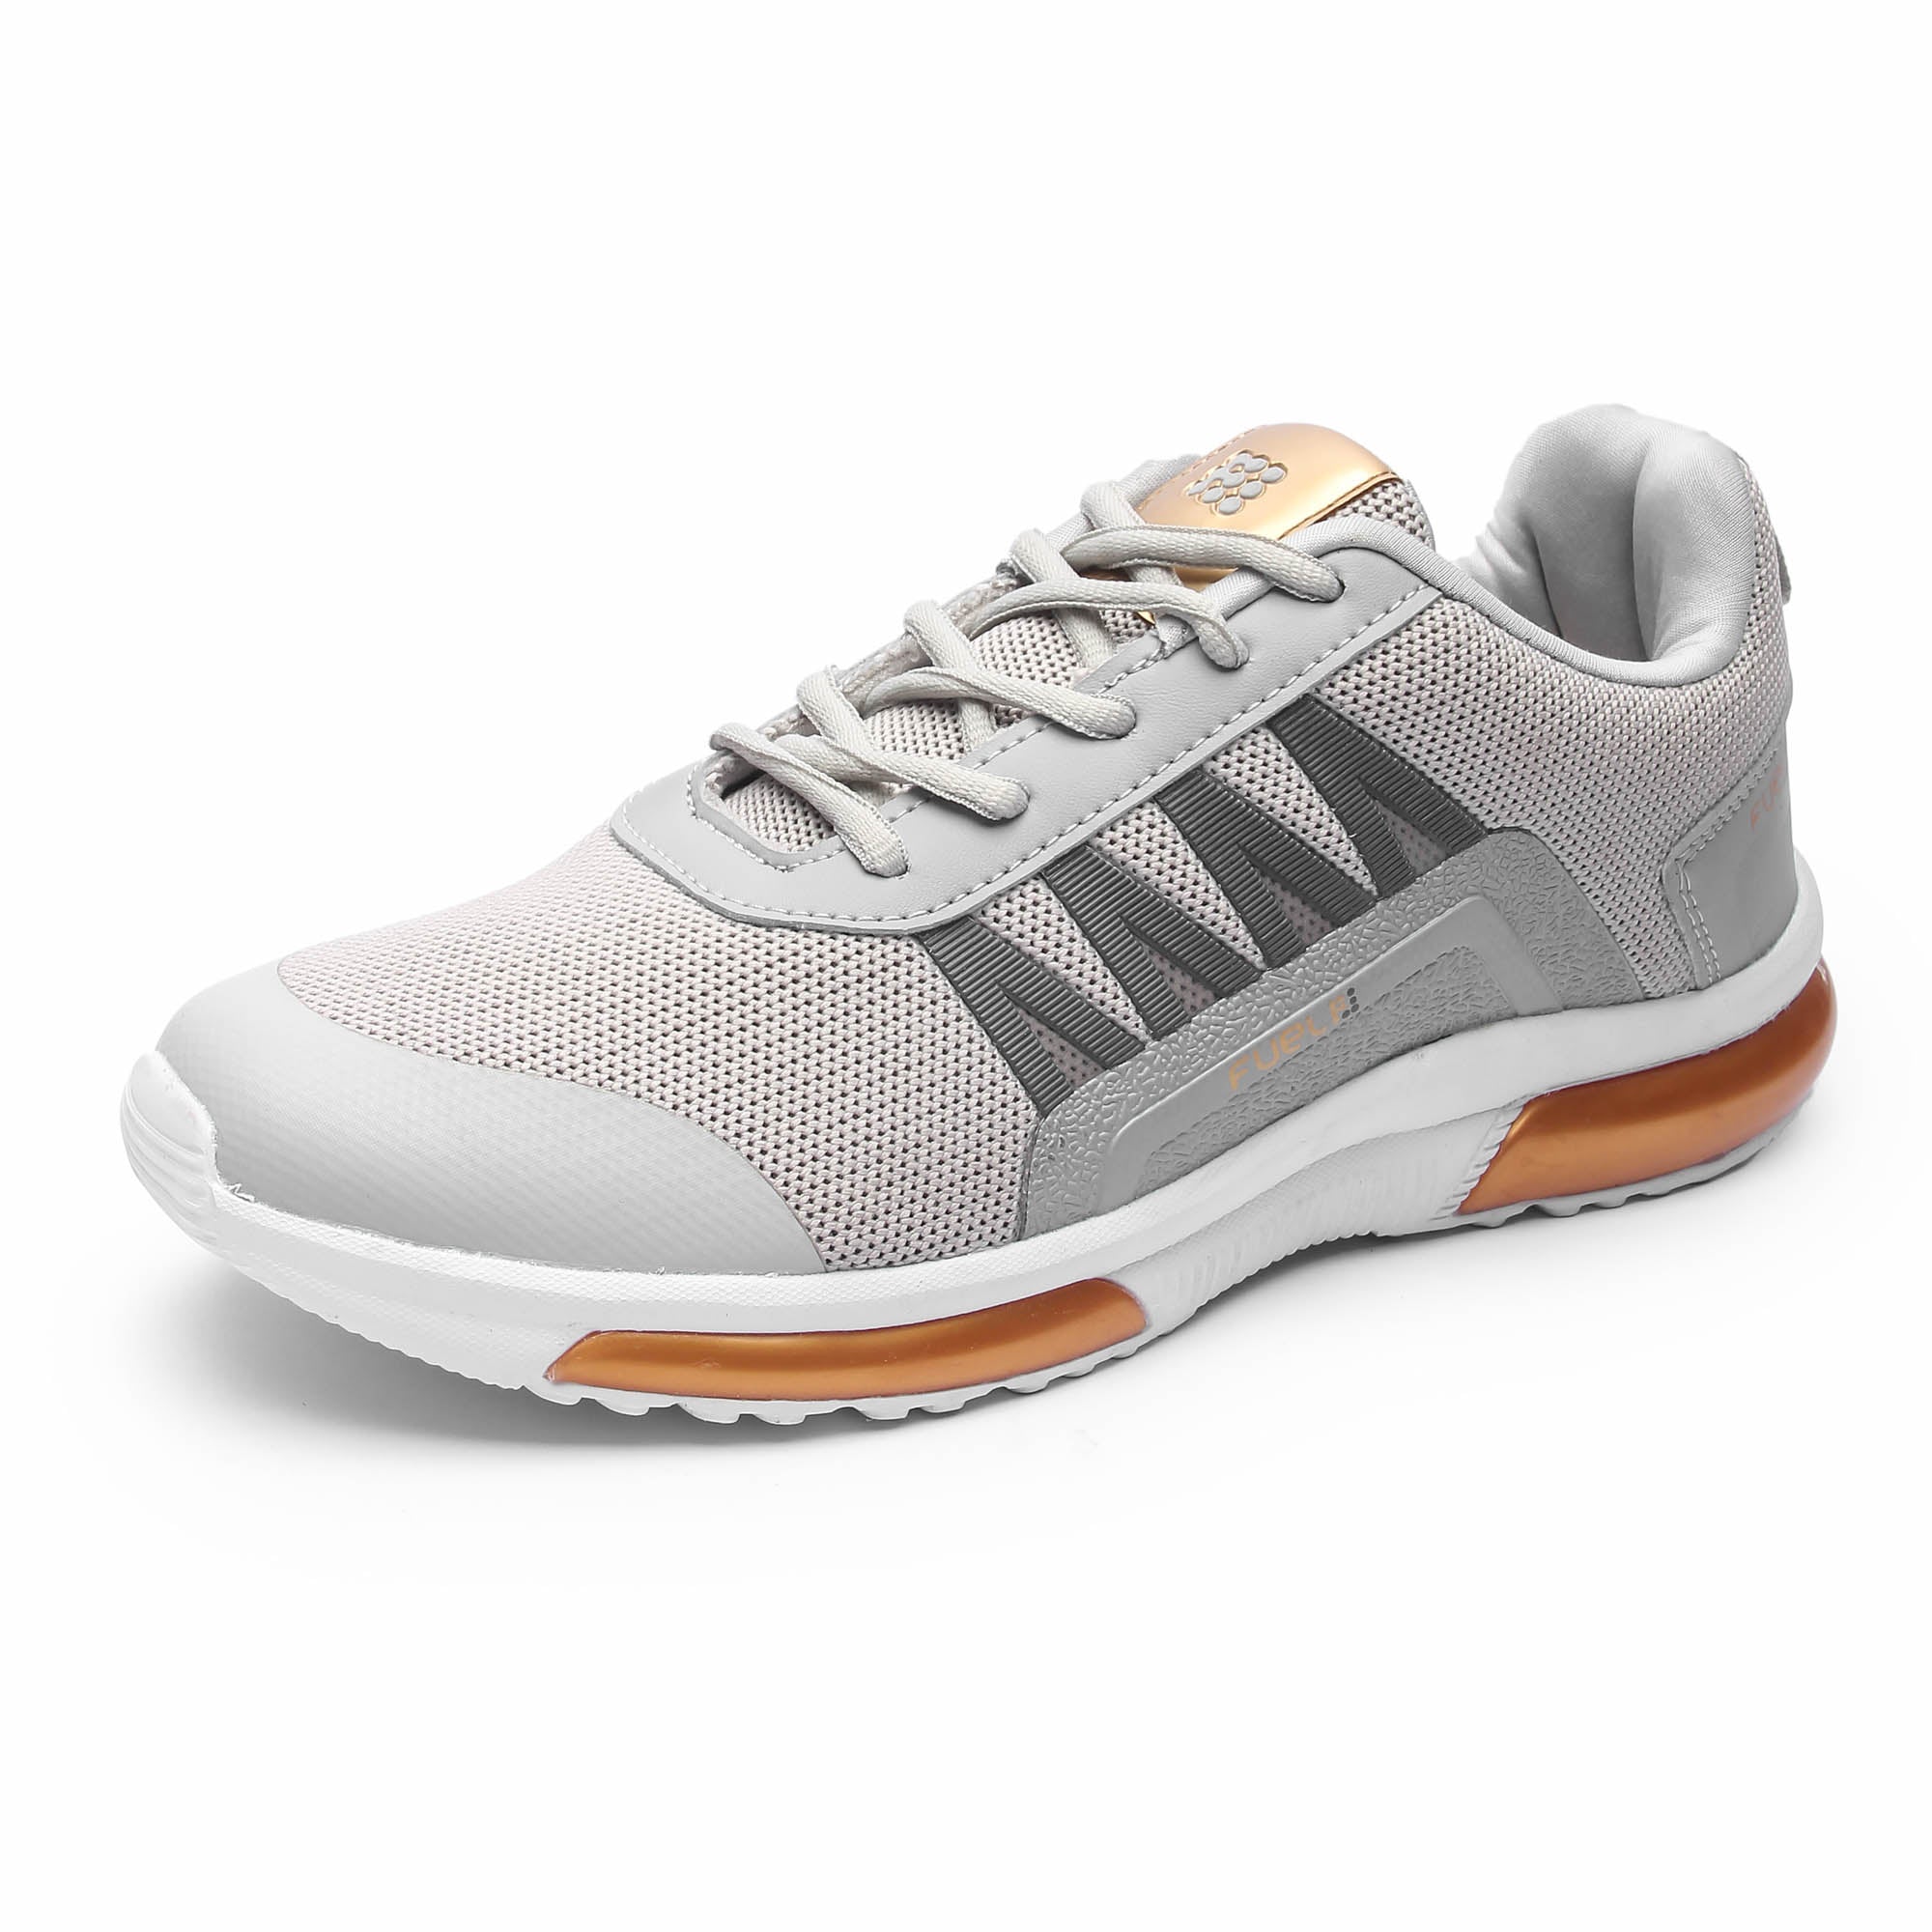 FUEL Polo Grey Gold Men's Sneakers for Walking/Running | Comfortable, Lightweight & Breathable, Dailywear | Gents Stylish Footwear